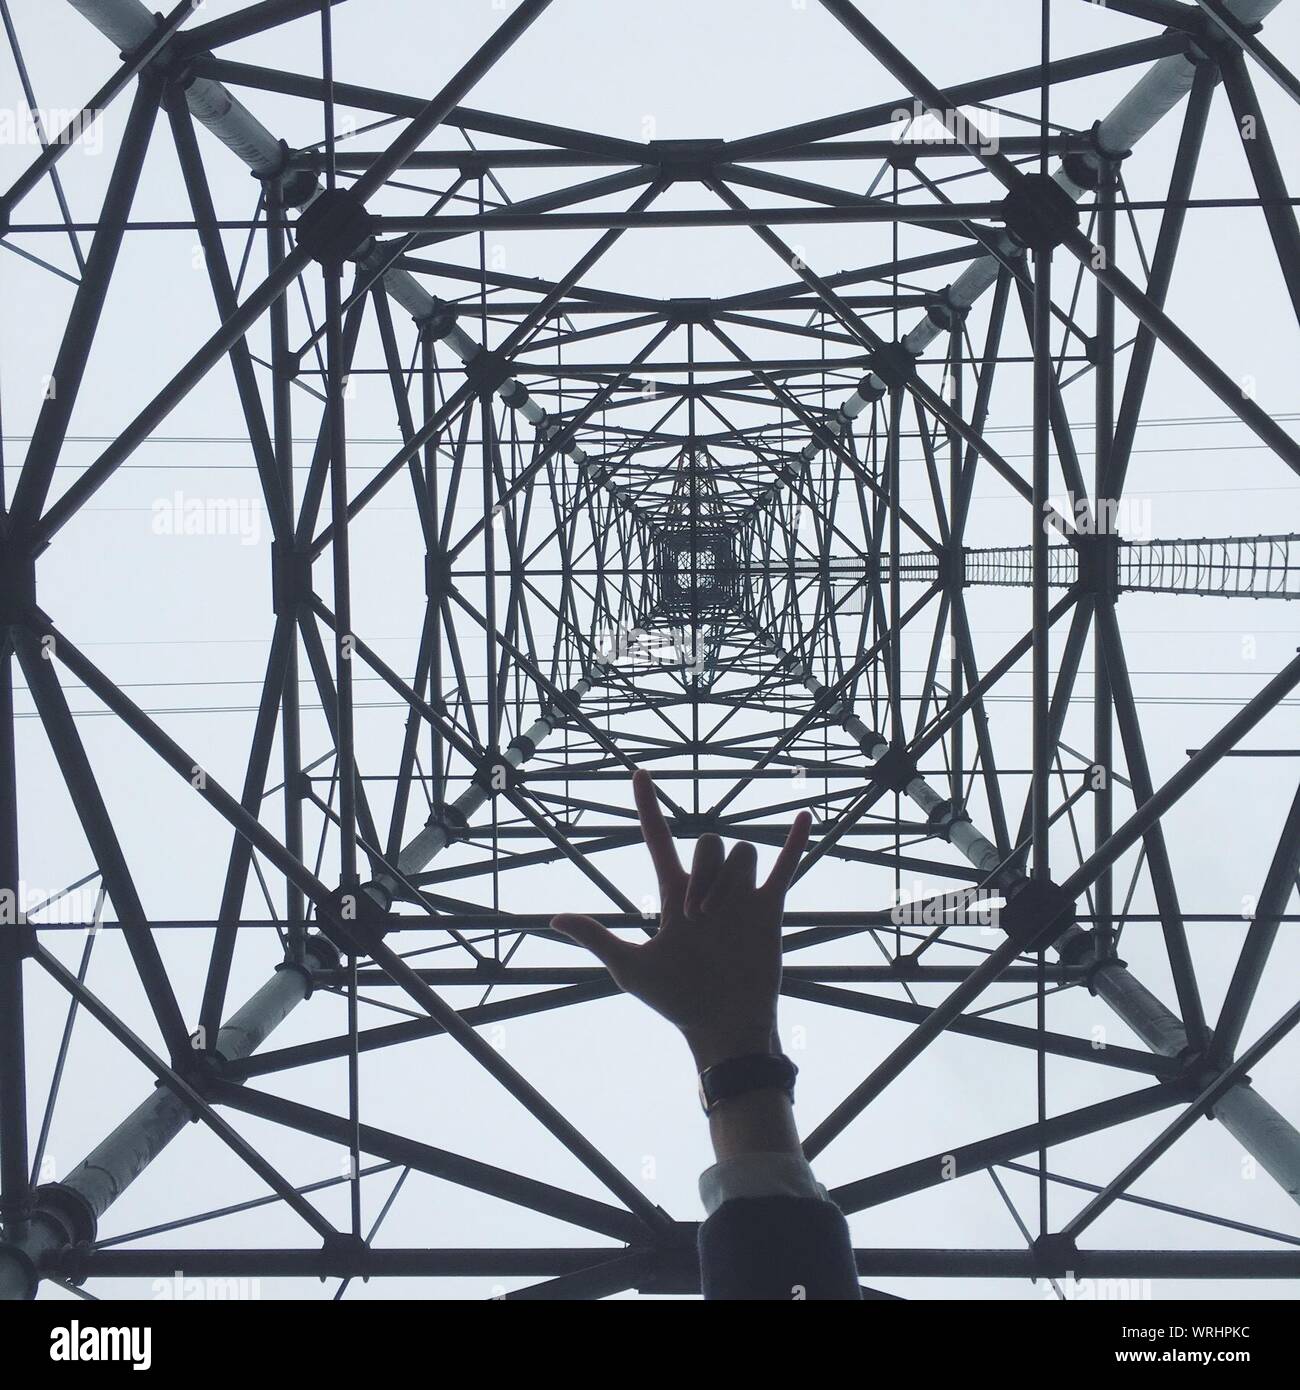 Cropped Hand Gesture Against Electricity Pylon Stock Photo